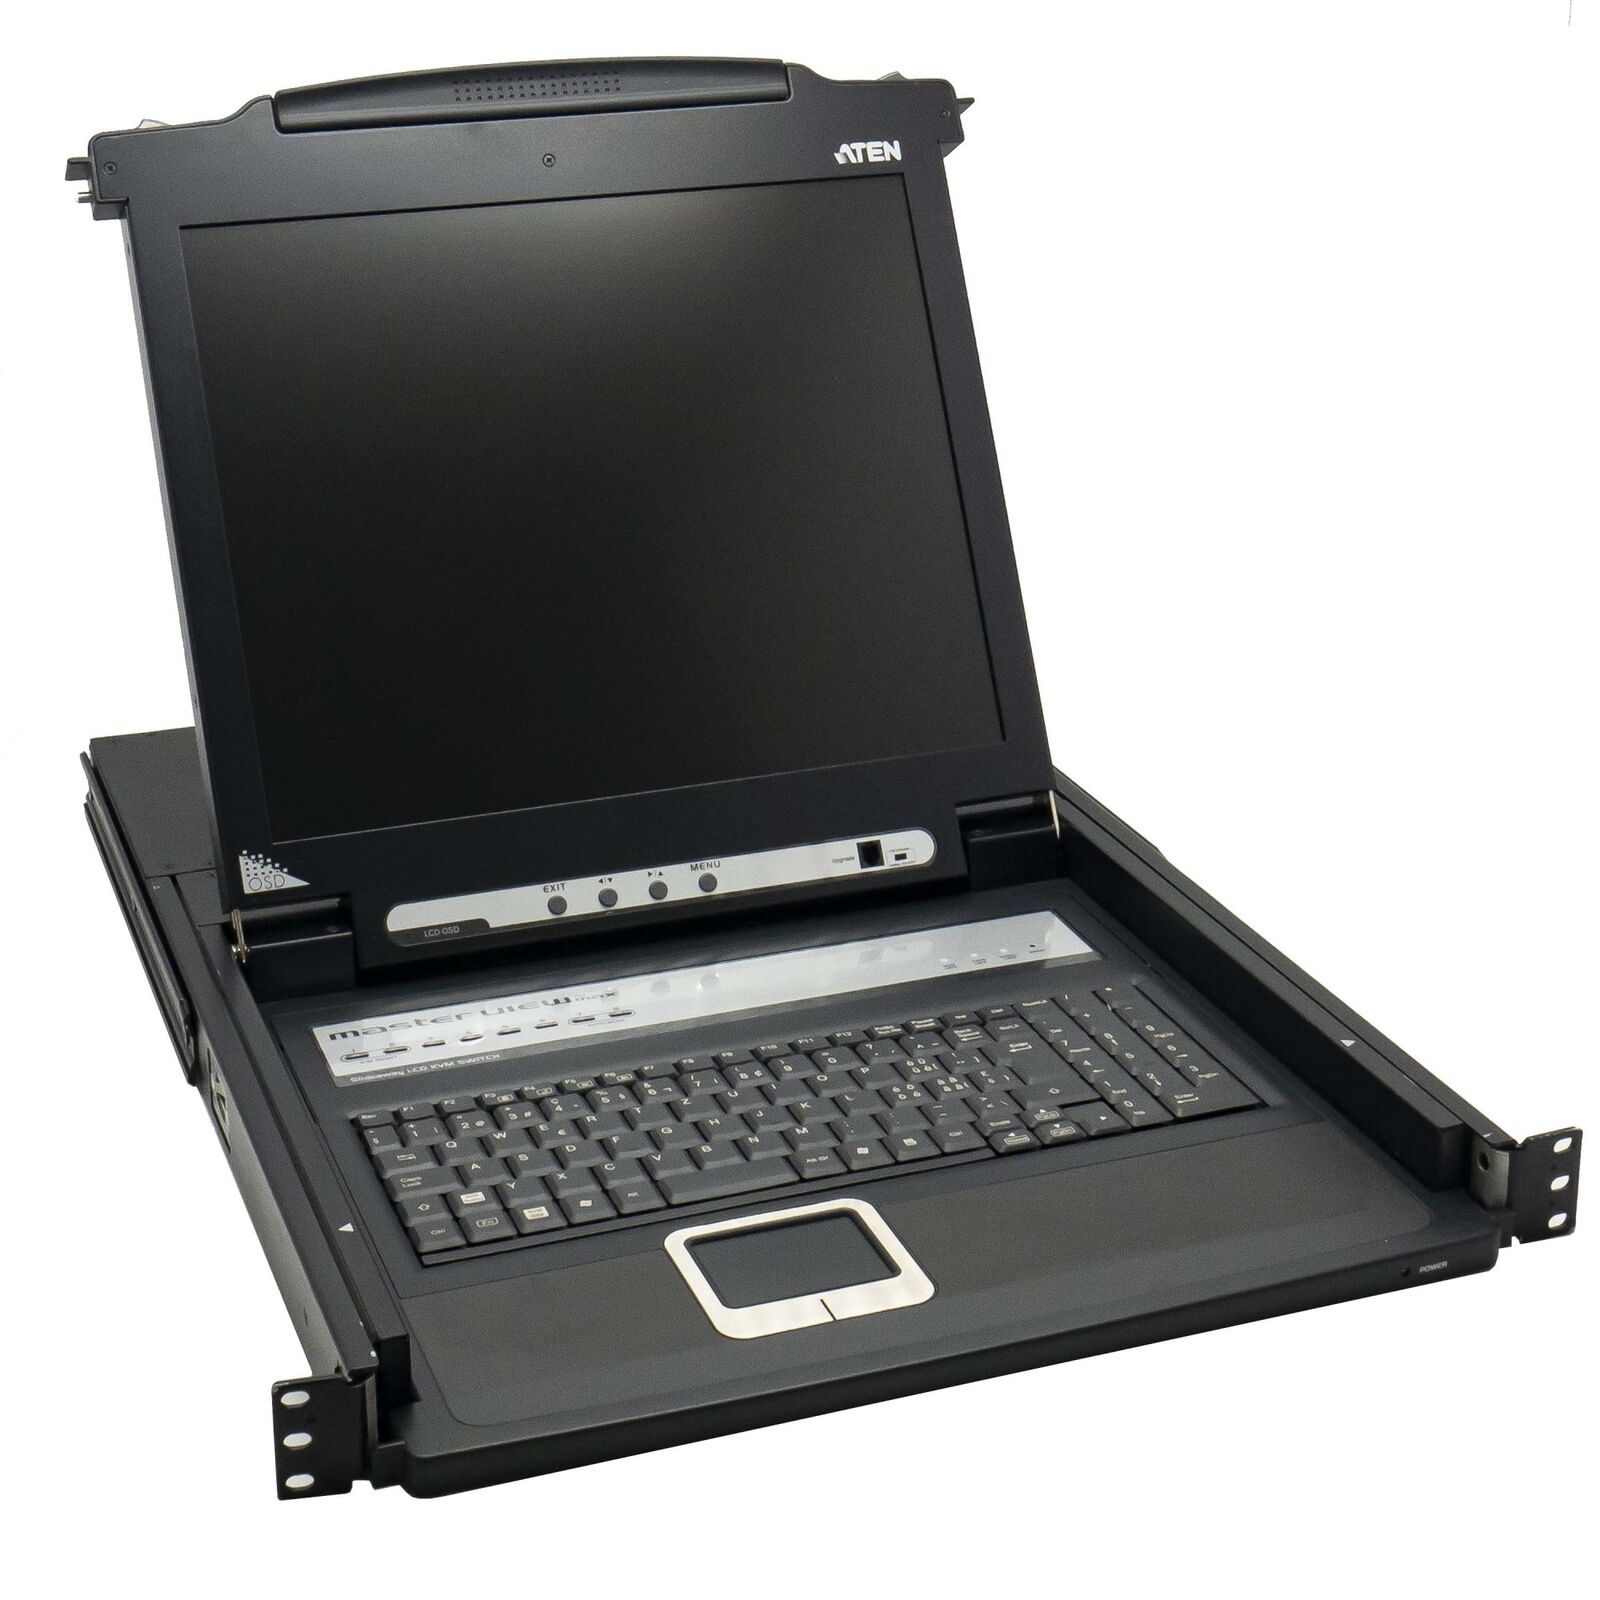 ATEN CL1008M 17” Console KVM 8 Ports With Chain Out Screen + Keyboard Rack Rail